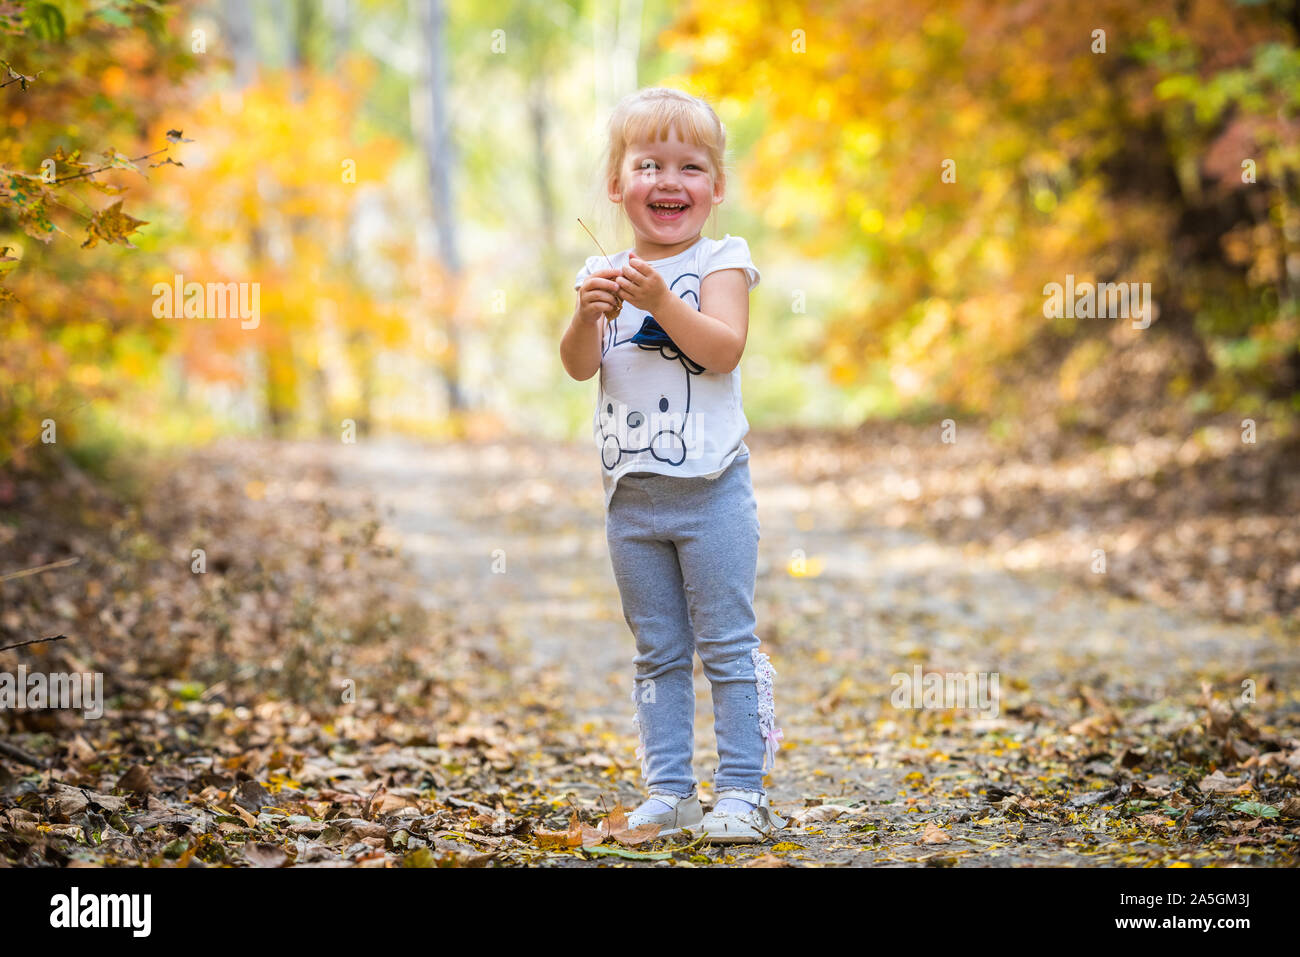 happy little child, baby girl laughing and playing in the autumn on the nature walk outdoors in the forest Stock Photo